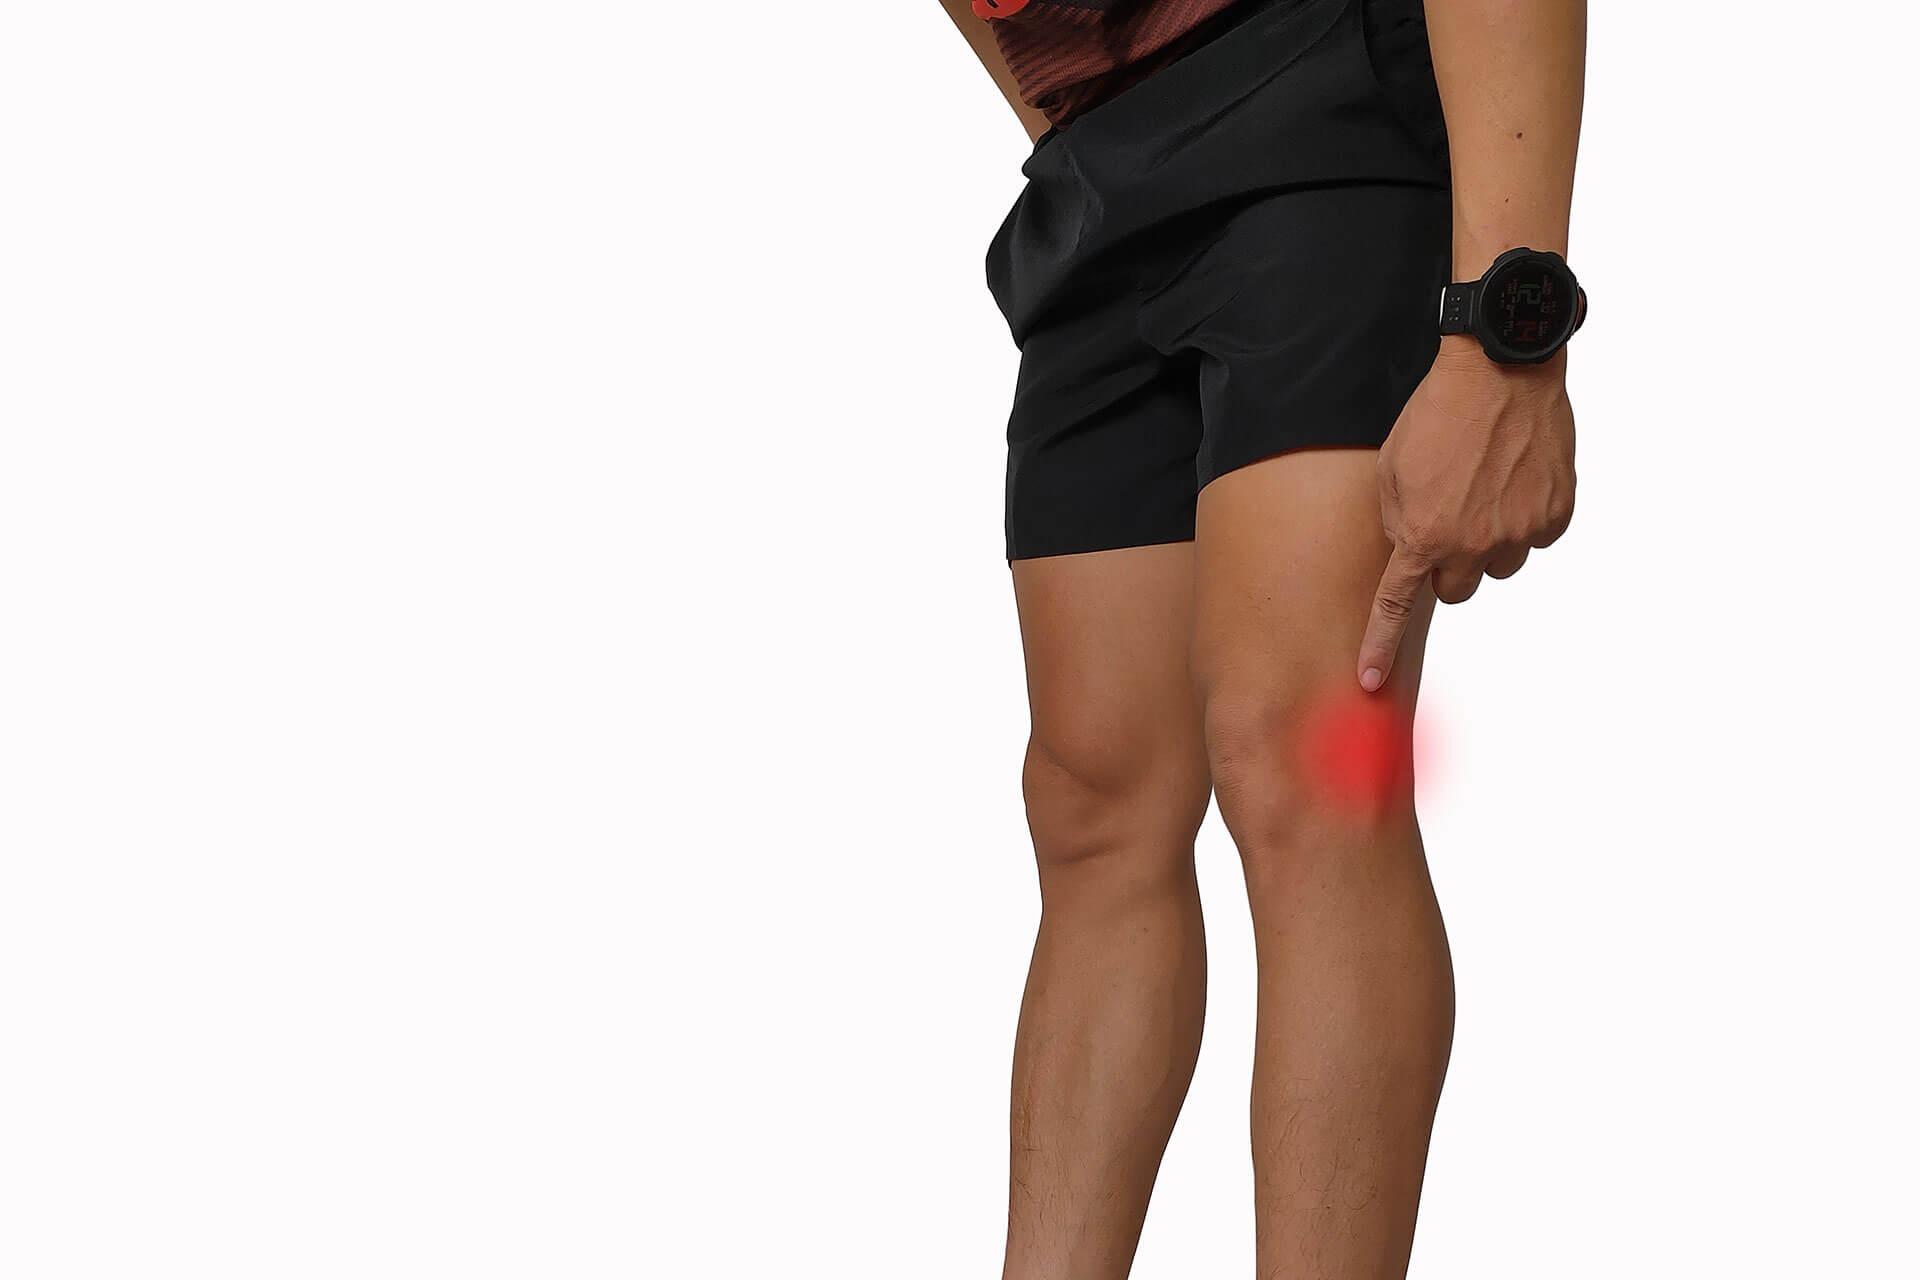 Iliotibial Band Syndrome (ITBS)